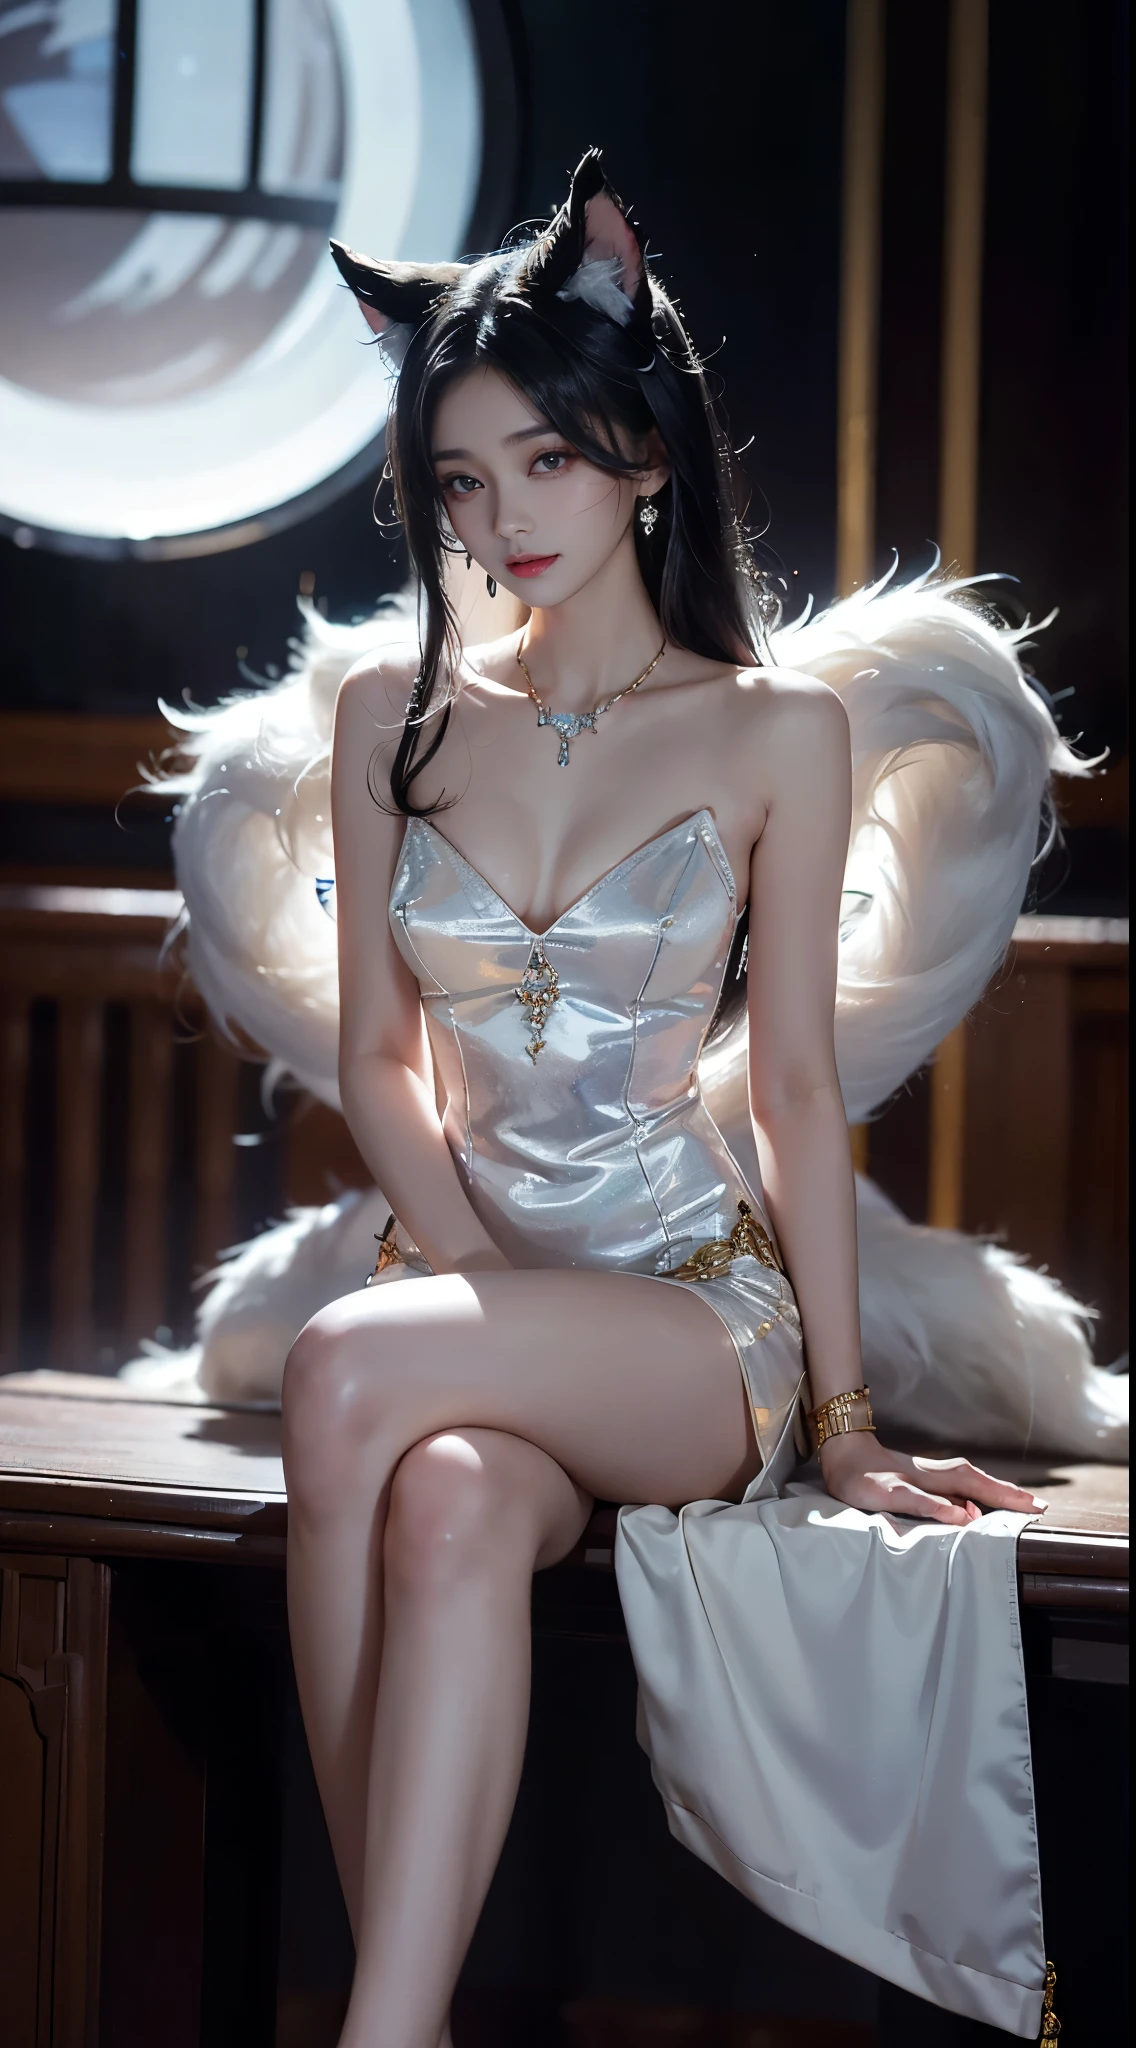  ahri_Cosplay, White Tails, Black long hair, yellow eyes,  ((full body)), ((Shot from a random perspective)), ((sitting position)), ((in the classroom, Sit at the lectern)), (yushuxin,1girl,独奏), clear face, pretty face, 8K, masterpiece, original photo, best quality, detail:1.2,lifelike, detail, Very detailed, CG, unified, wallpapers, depth of field, movie light, lens flare, Ray tracing, (extremely beautiful face, beautiful lips, beautiful eyes), intricate, detail face, ((ultra detailed skin)), 1 girl, in the darkness, deep shadow, beautiful korean girl, kpop idol,(Very slim figure:1.3), A plump chest, Large breasts, Slender sexy legs, Very nice legs, elegant posture, (bright smile), (City night, (neon lights), (night), beautiful korean girl, white diamond earrings, Diameter bracelet, Dia necklace, clear eyes, (big eyes)